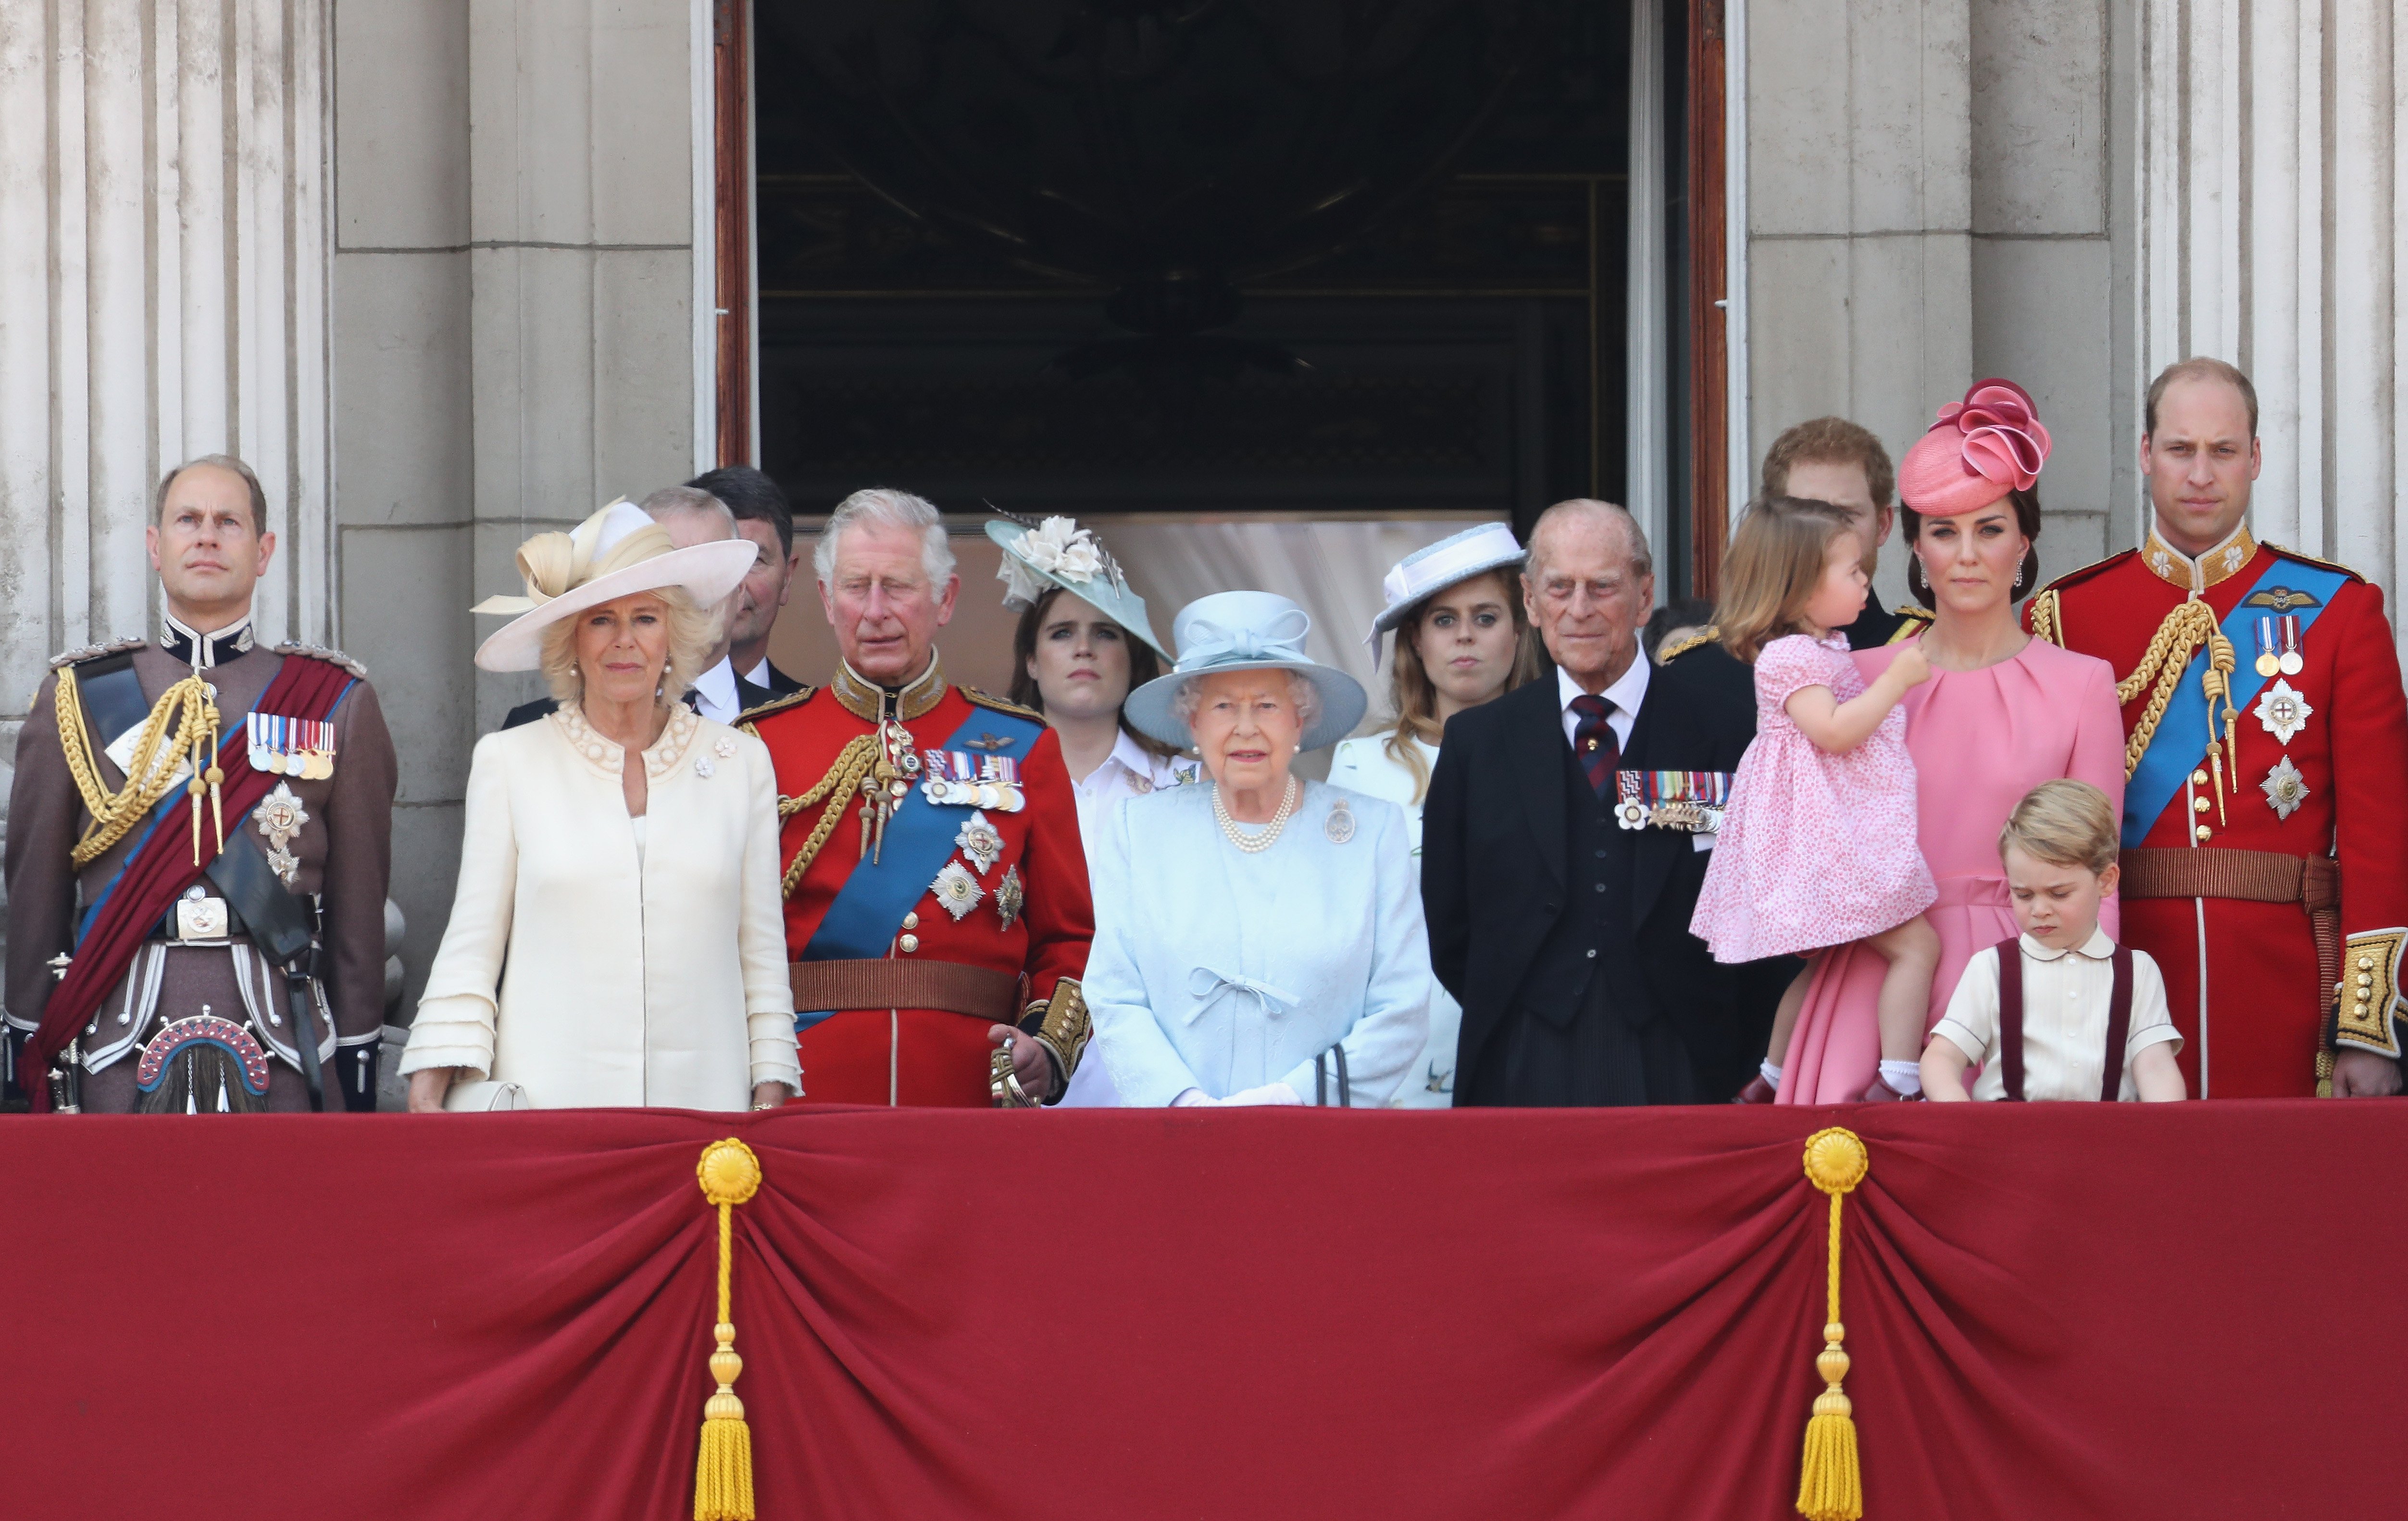 The Royal family at Buckingham Palace in 2017. | Source: Getty Images